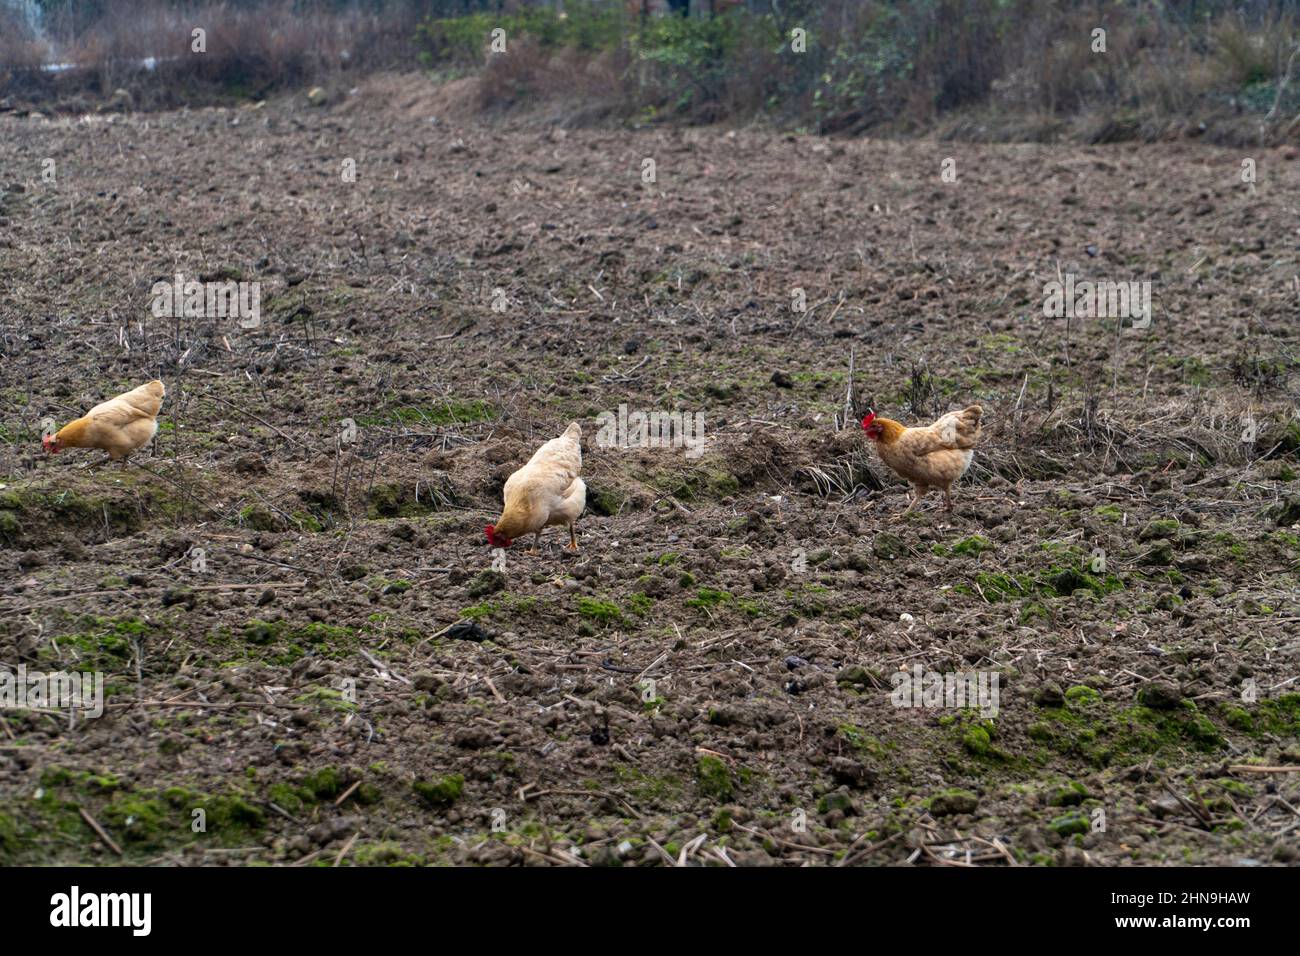 Chickens in Chinese rural fields Stock Photo